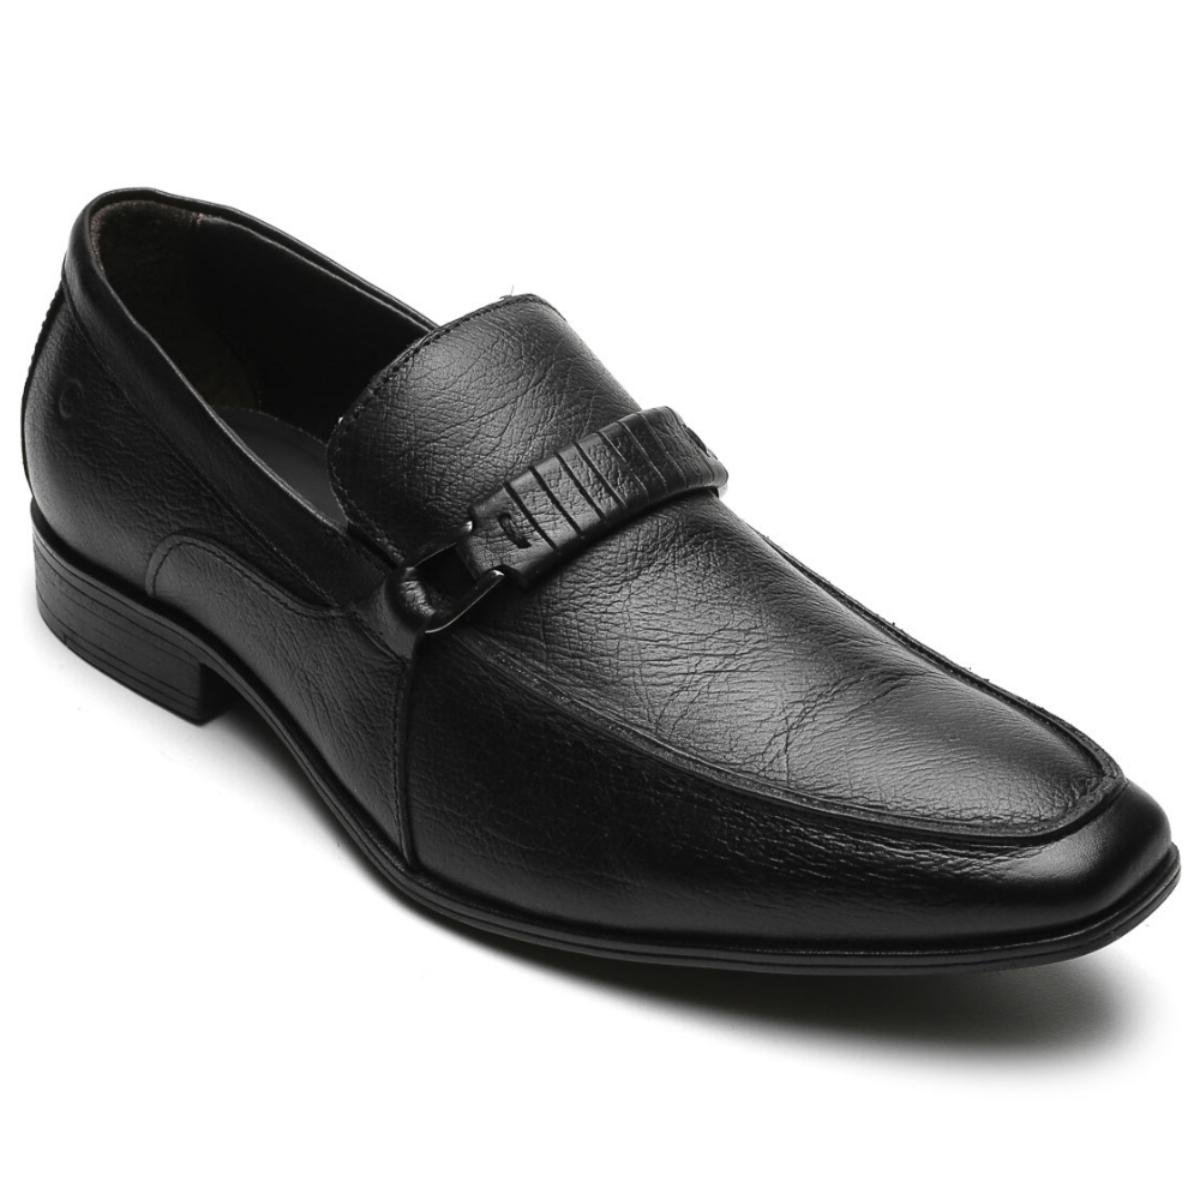 Leather Shoes Hs Code - aristocratmoms